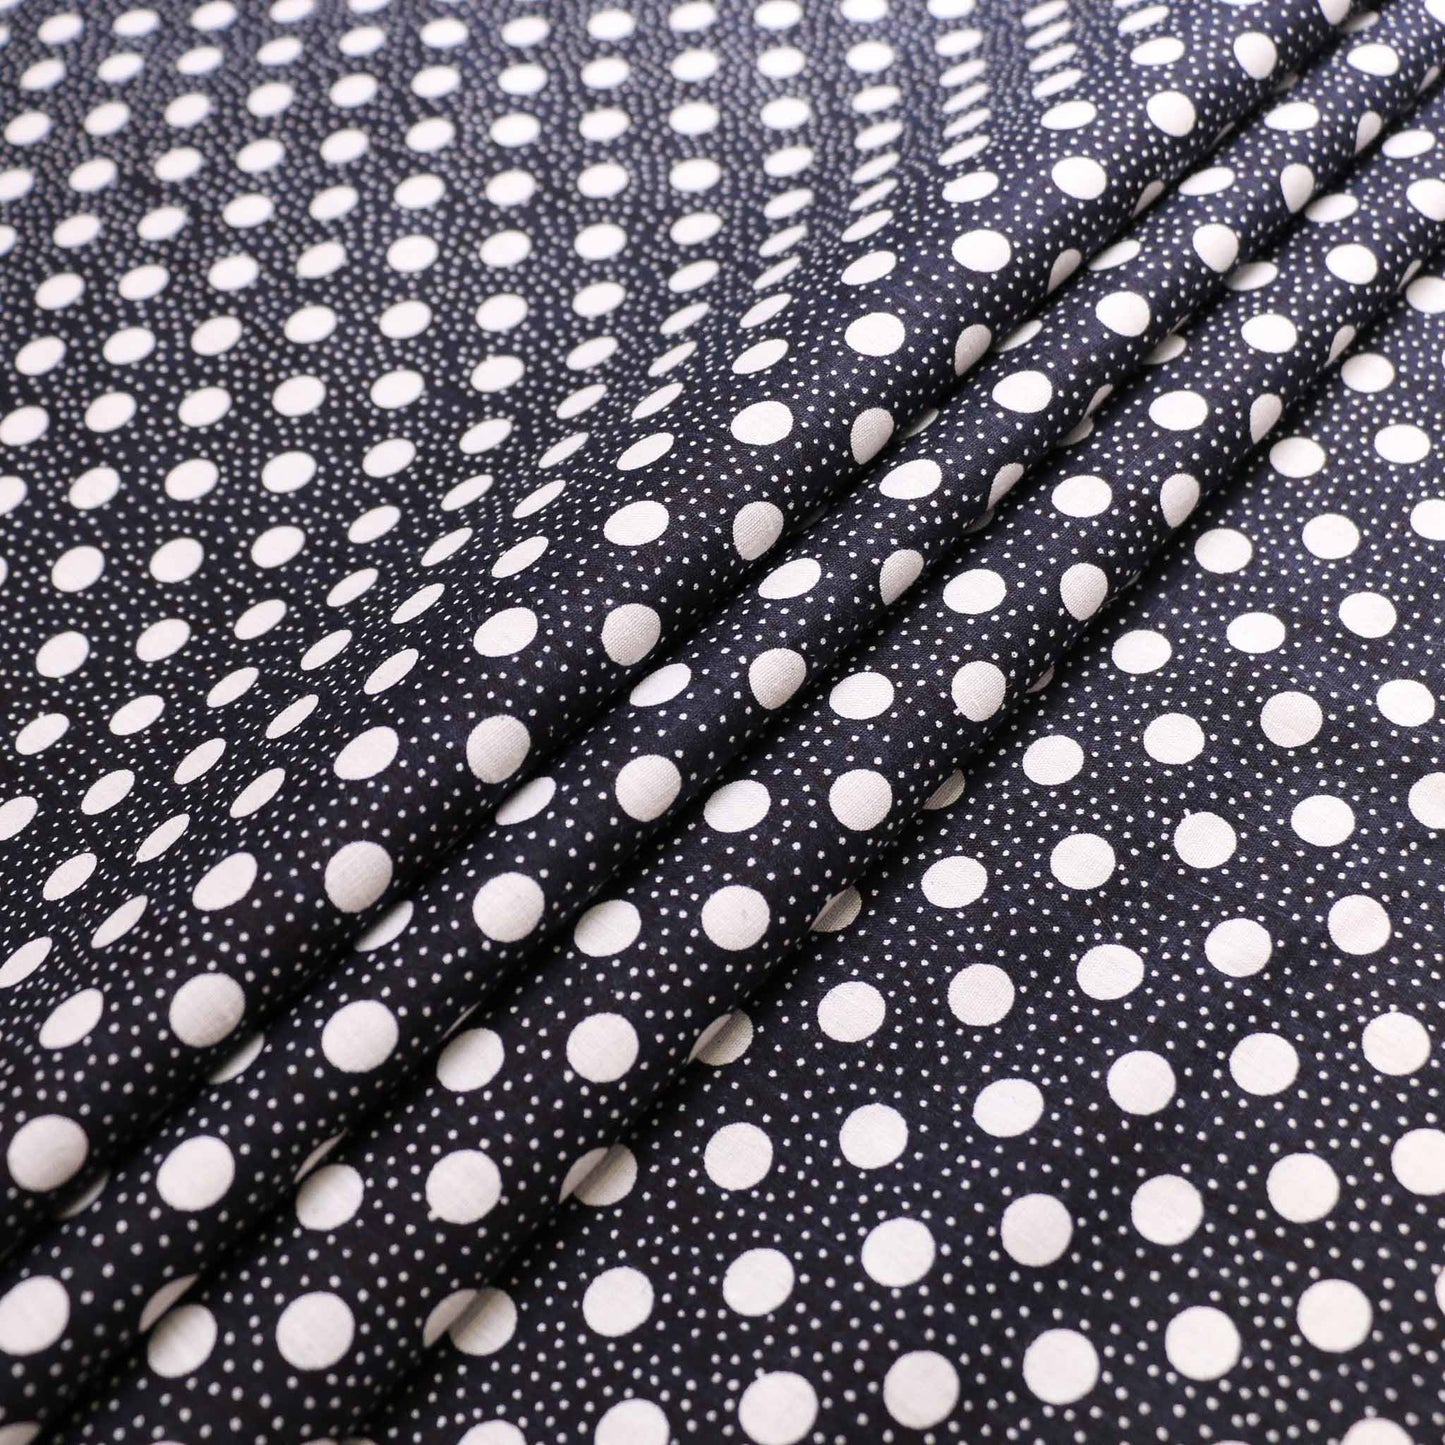 folded black vintage cotton poplin deadstock sustainable fabric with printed polka dot pattern